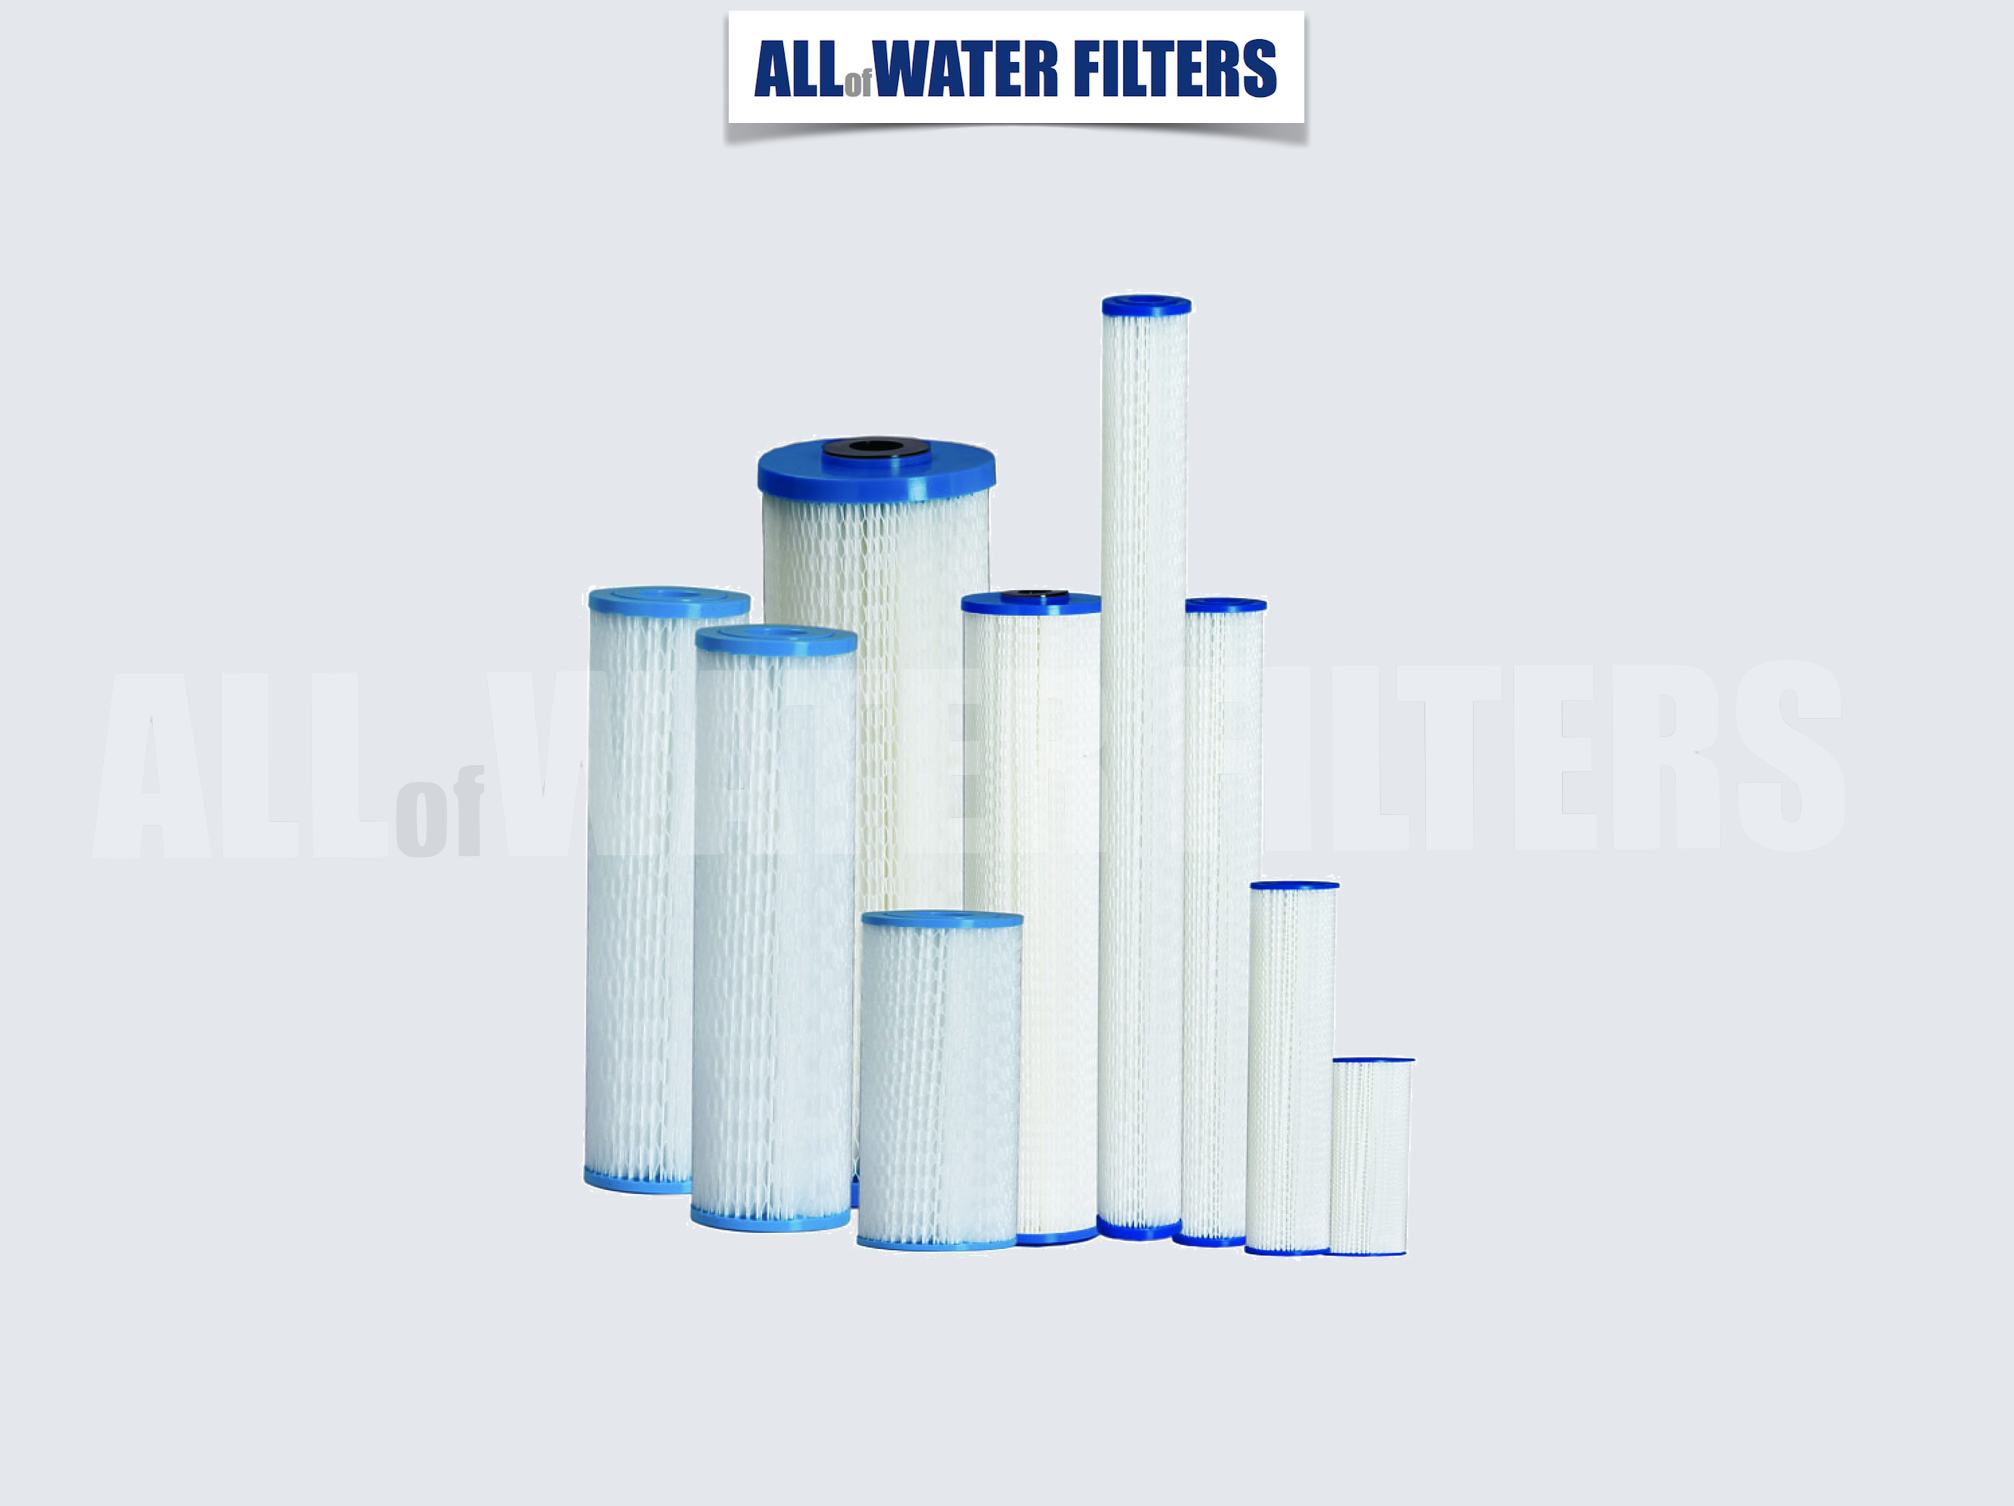 pleated-sediment-water-filters